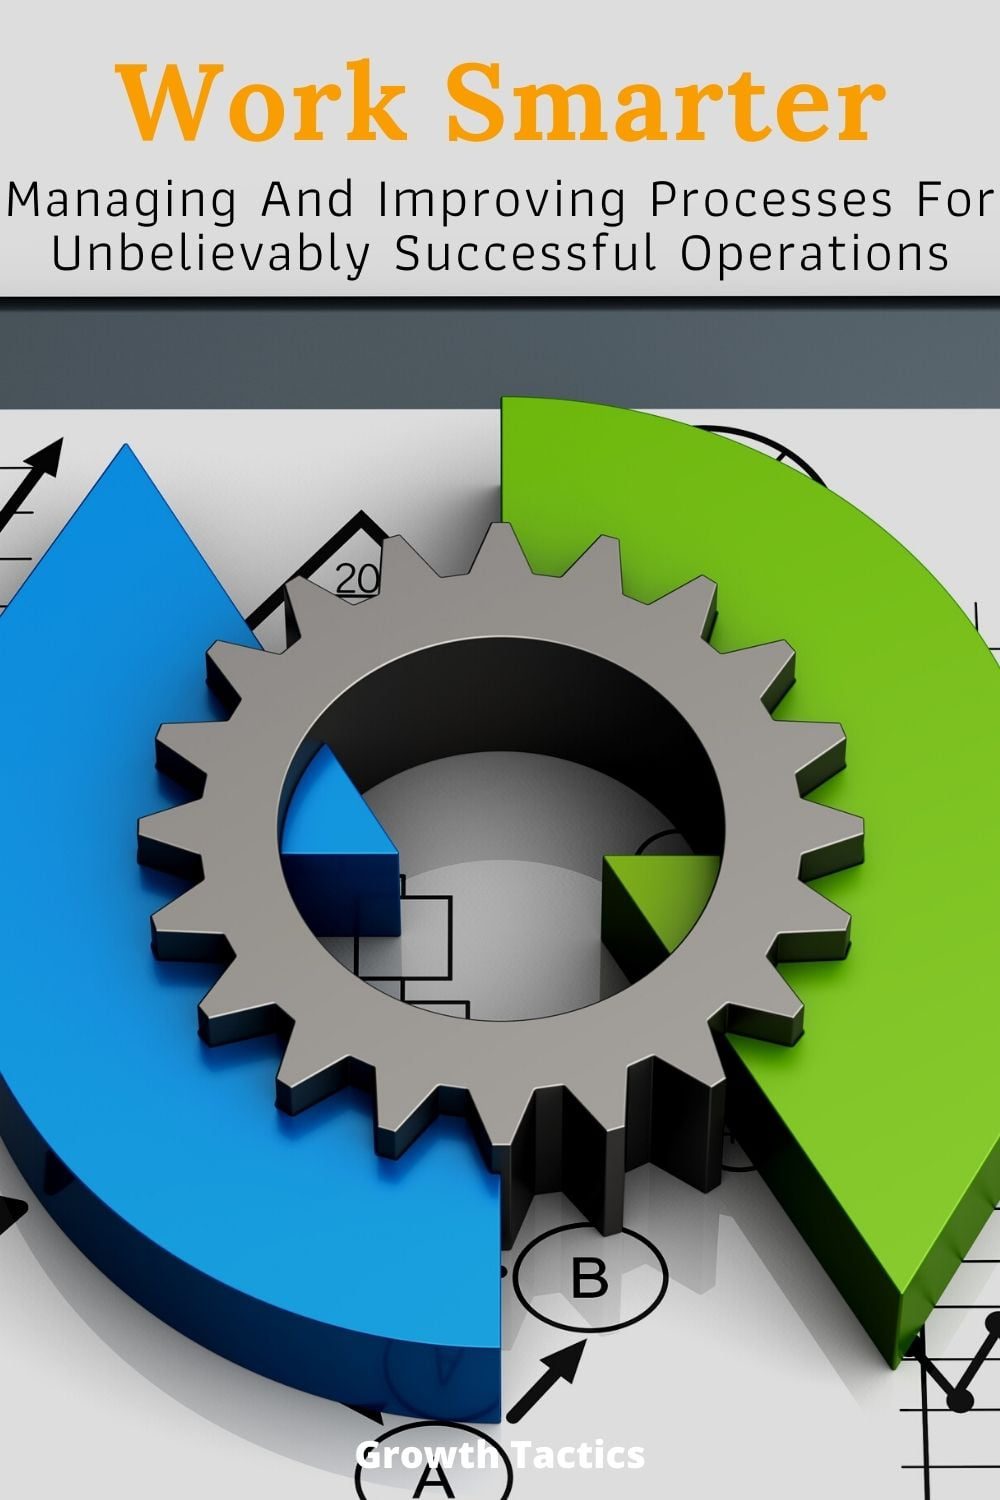 Managing And Improving Processes For Unbelievably Successful Operations